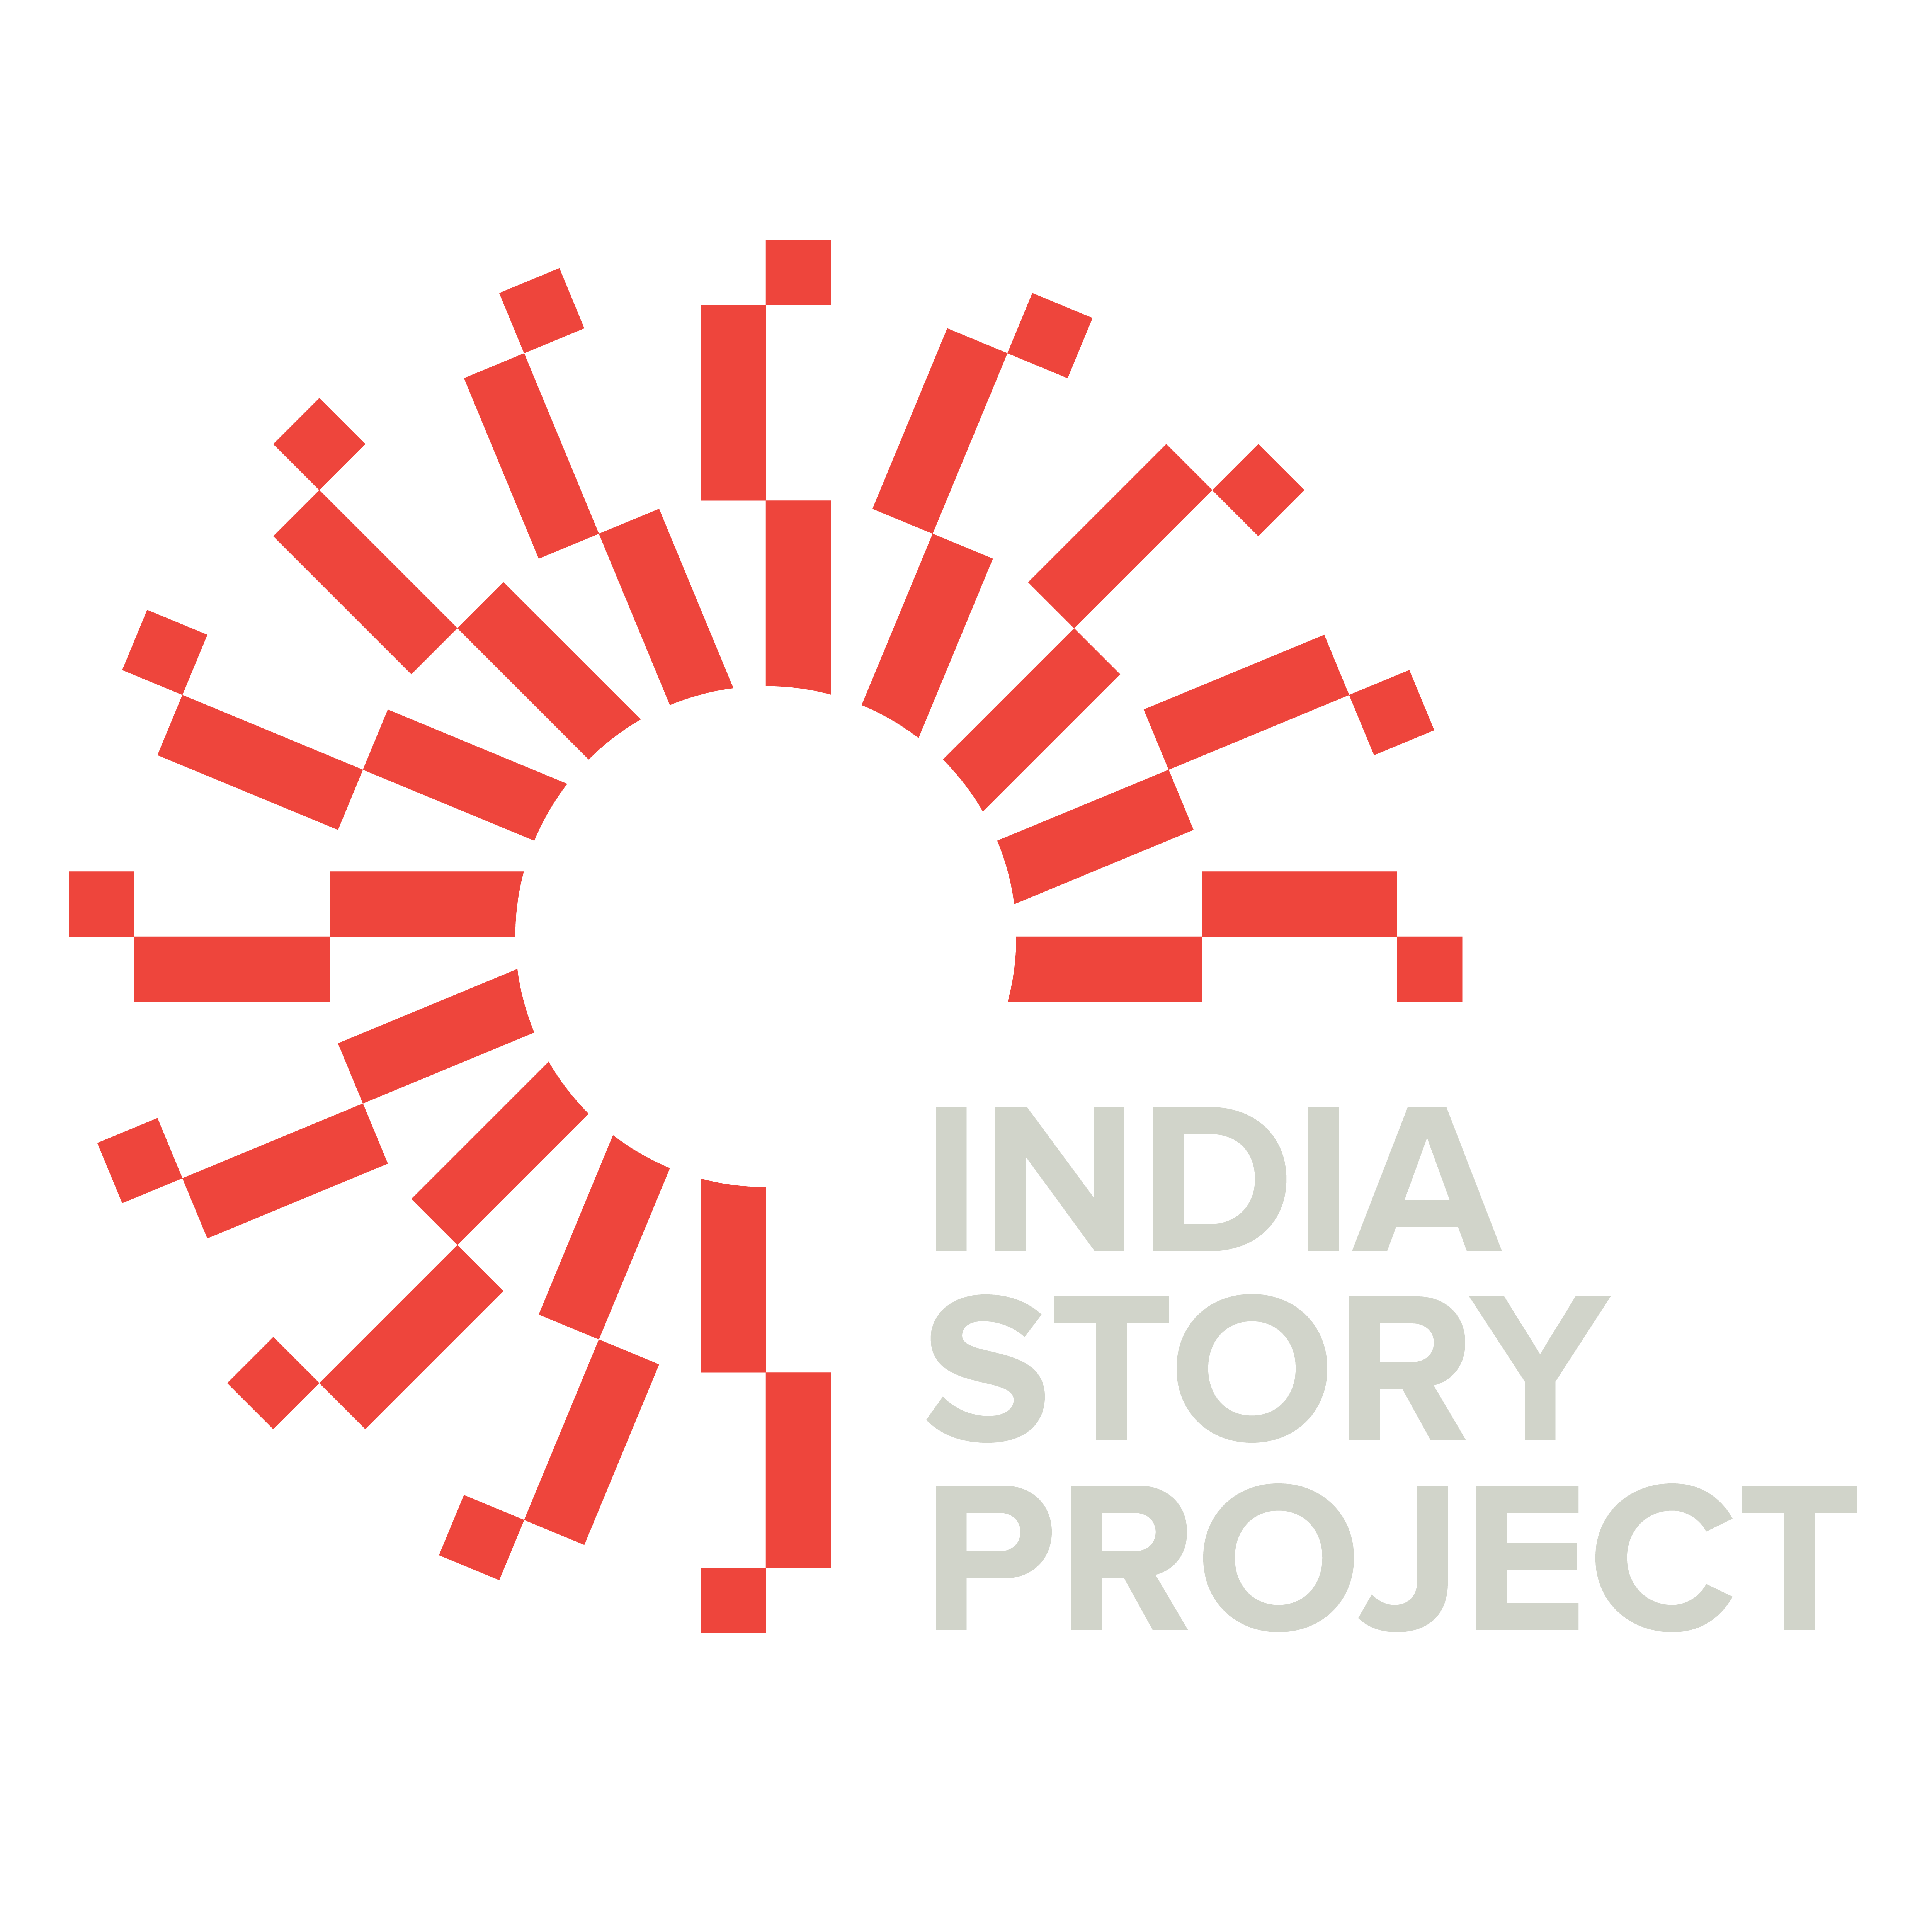 India Story Project